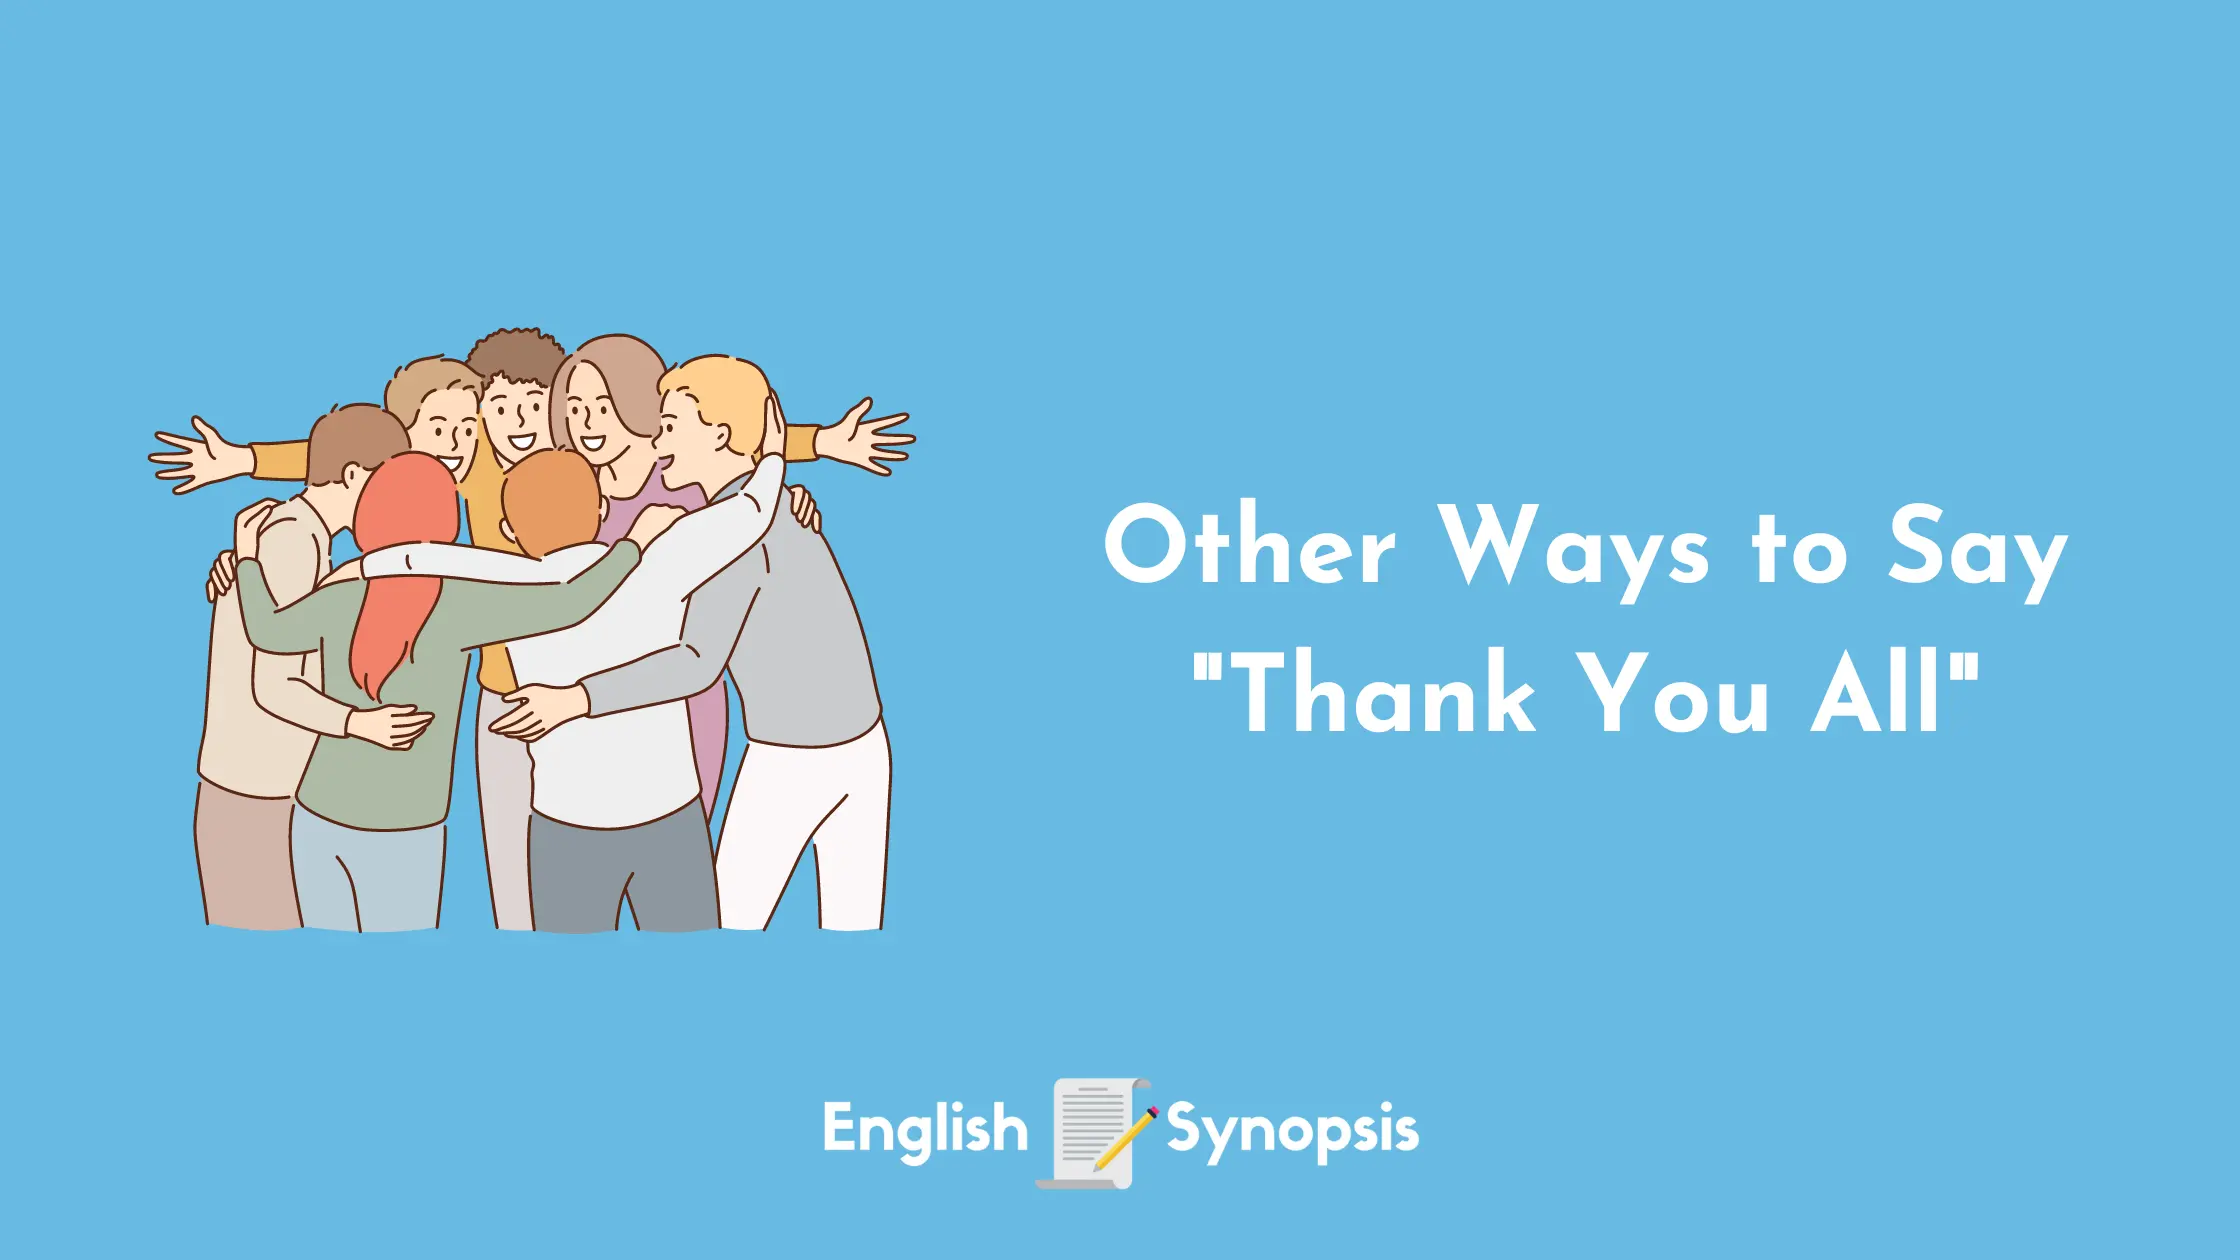 Other Ways to Say "Thank You All"